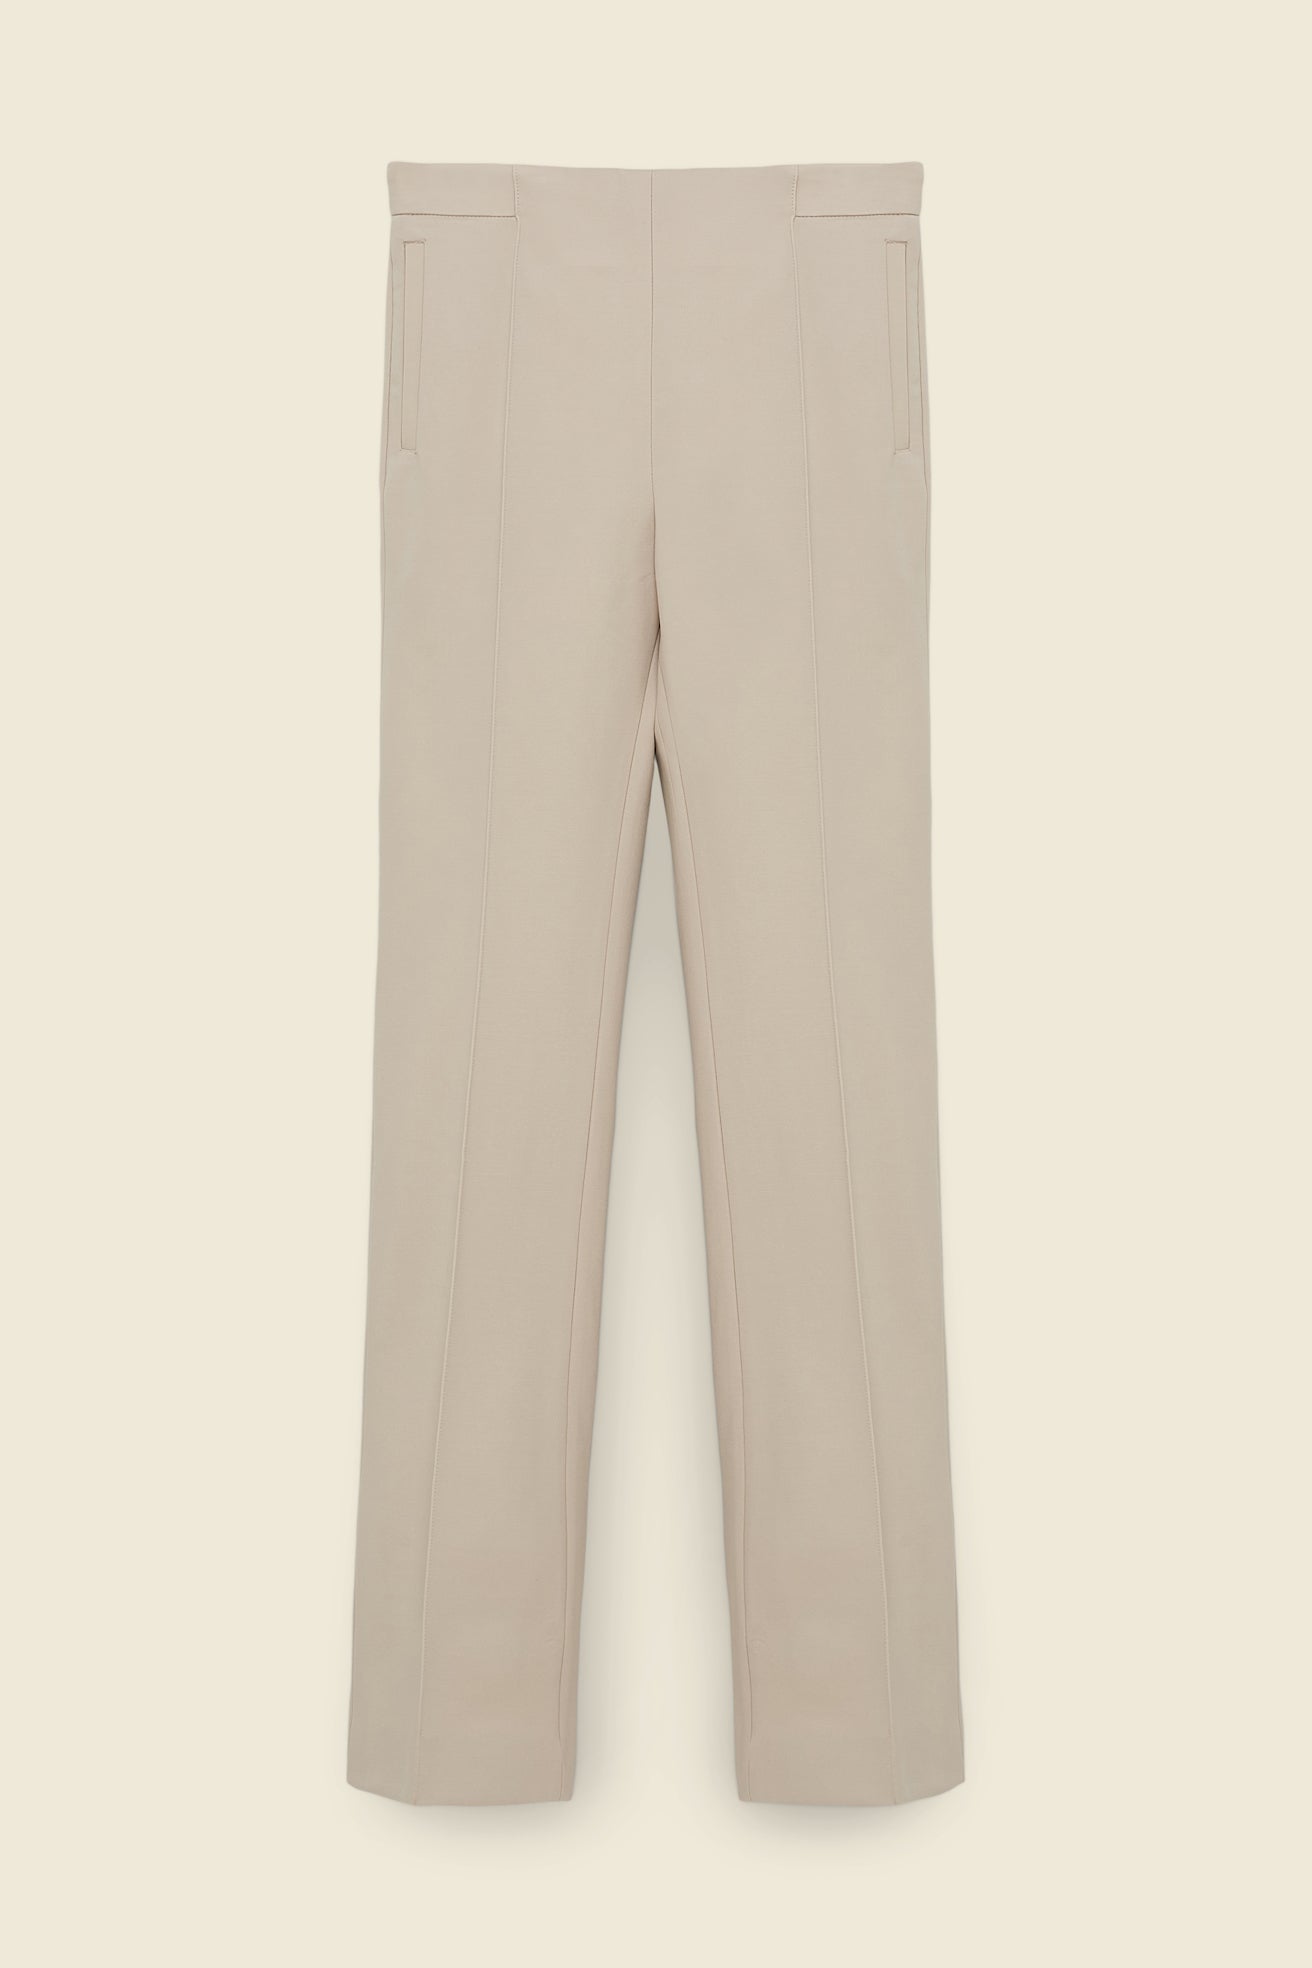 Emotional Pants by Dorothee Schumacher